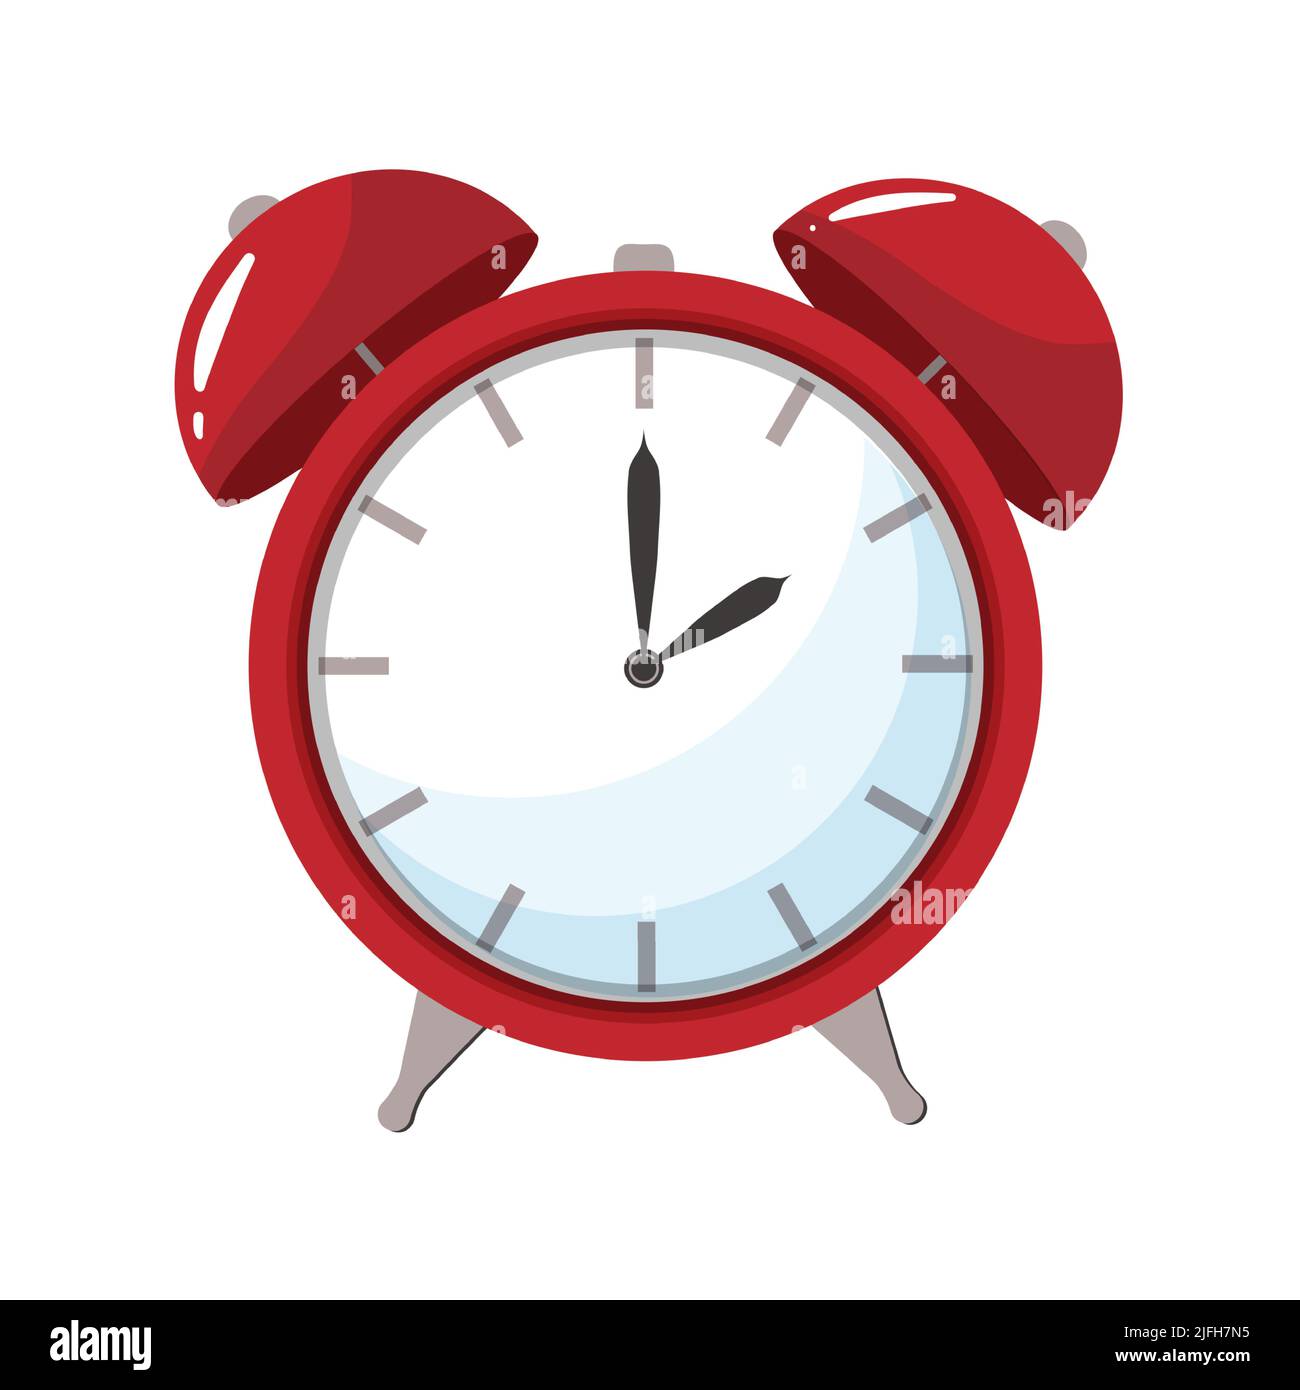 Alarm clock red wake up time consept icon iin flat style. Vector illustration isolated on white background. Stock Vector